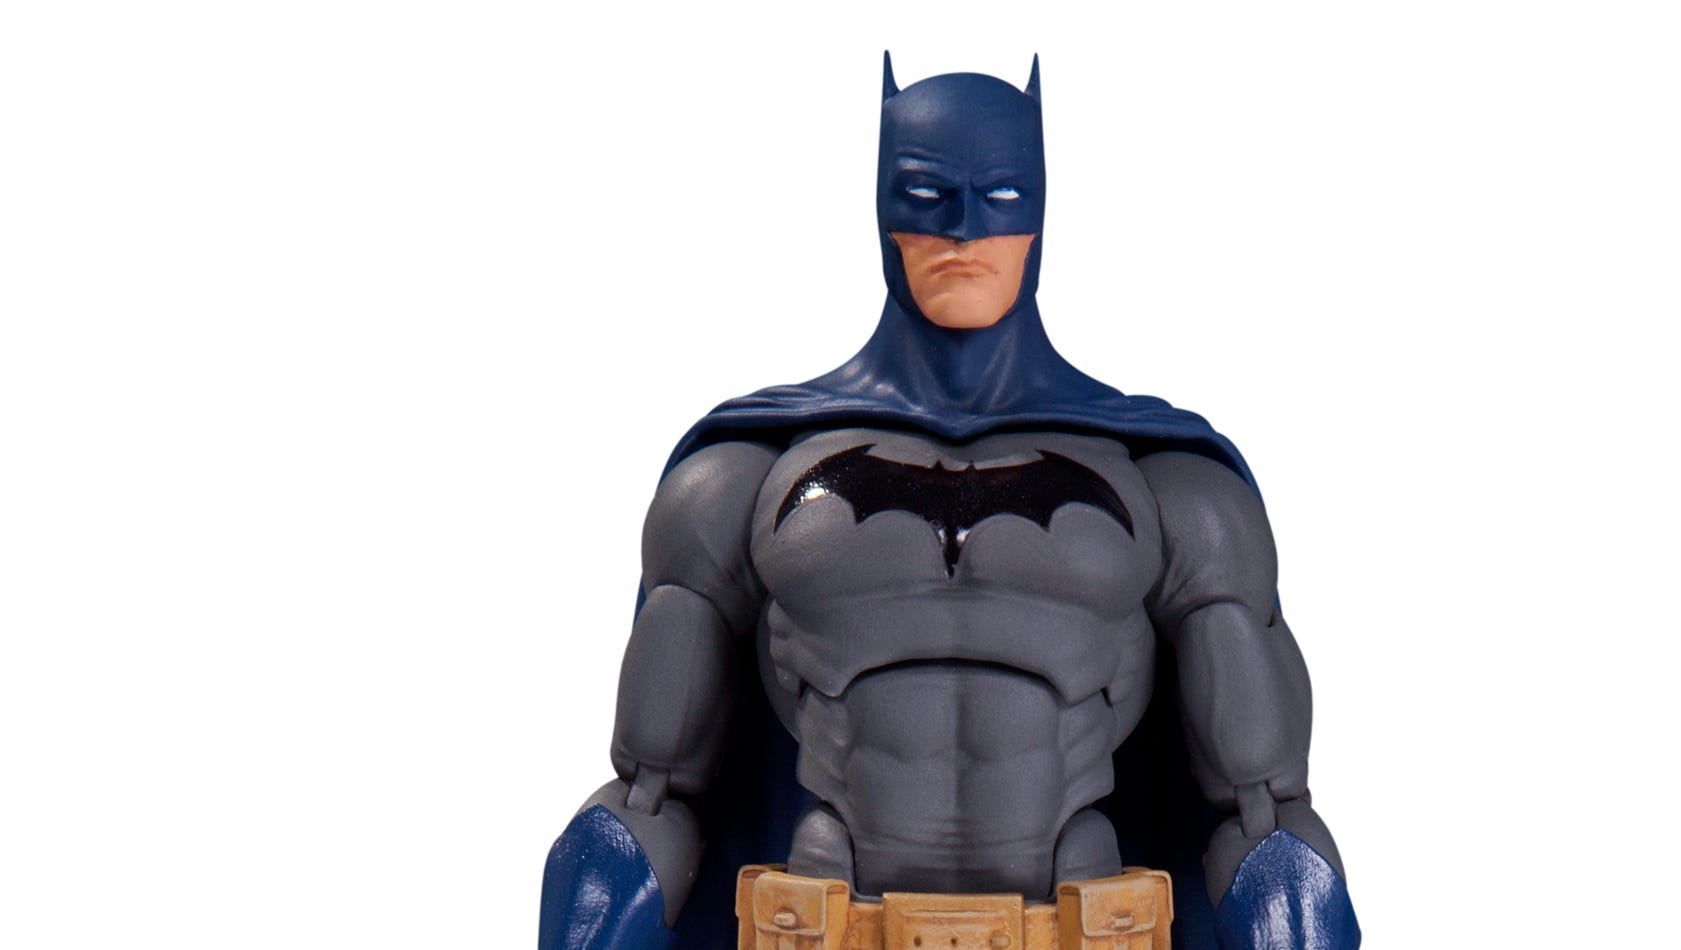 Exclusive: 'DC Comics Icons' figures coming in fall